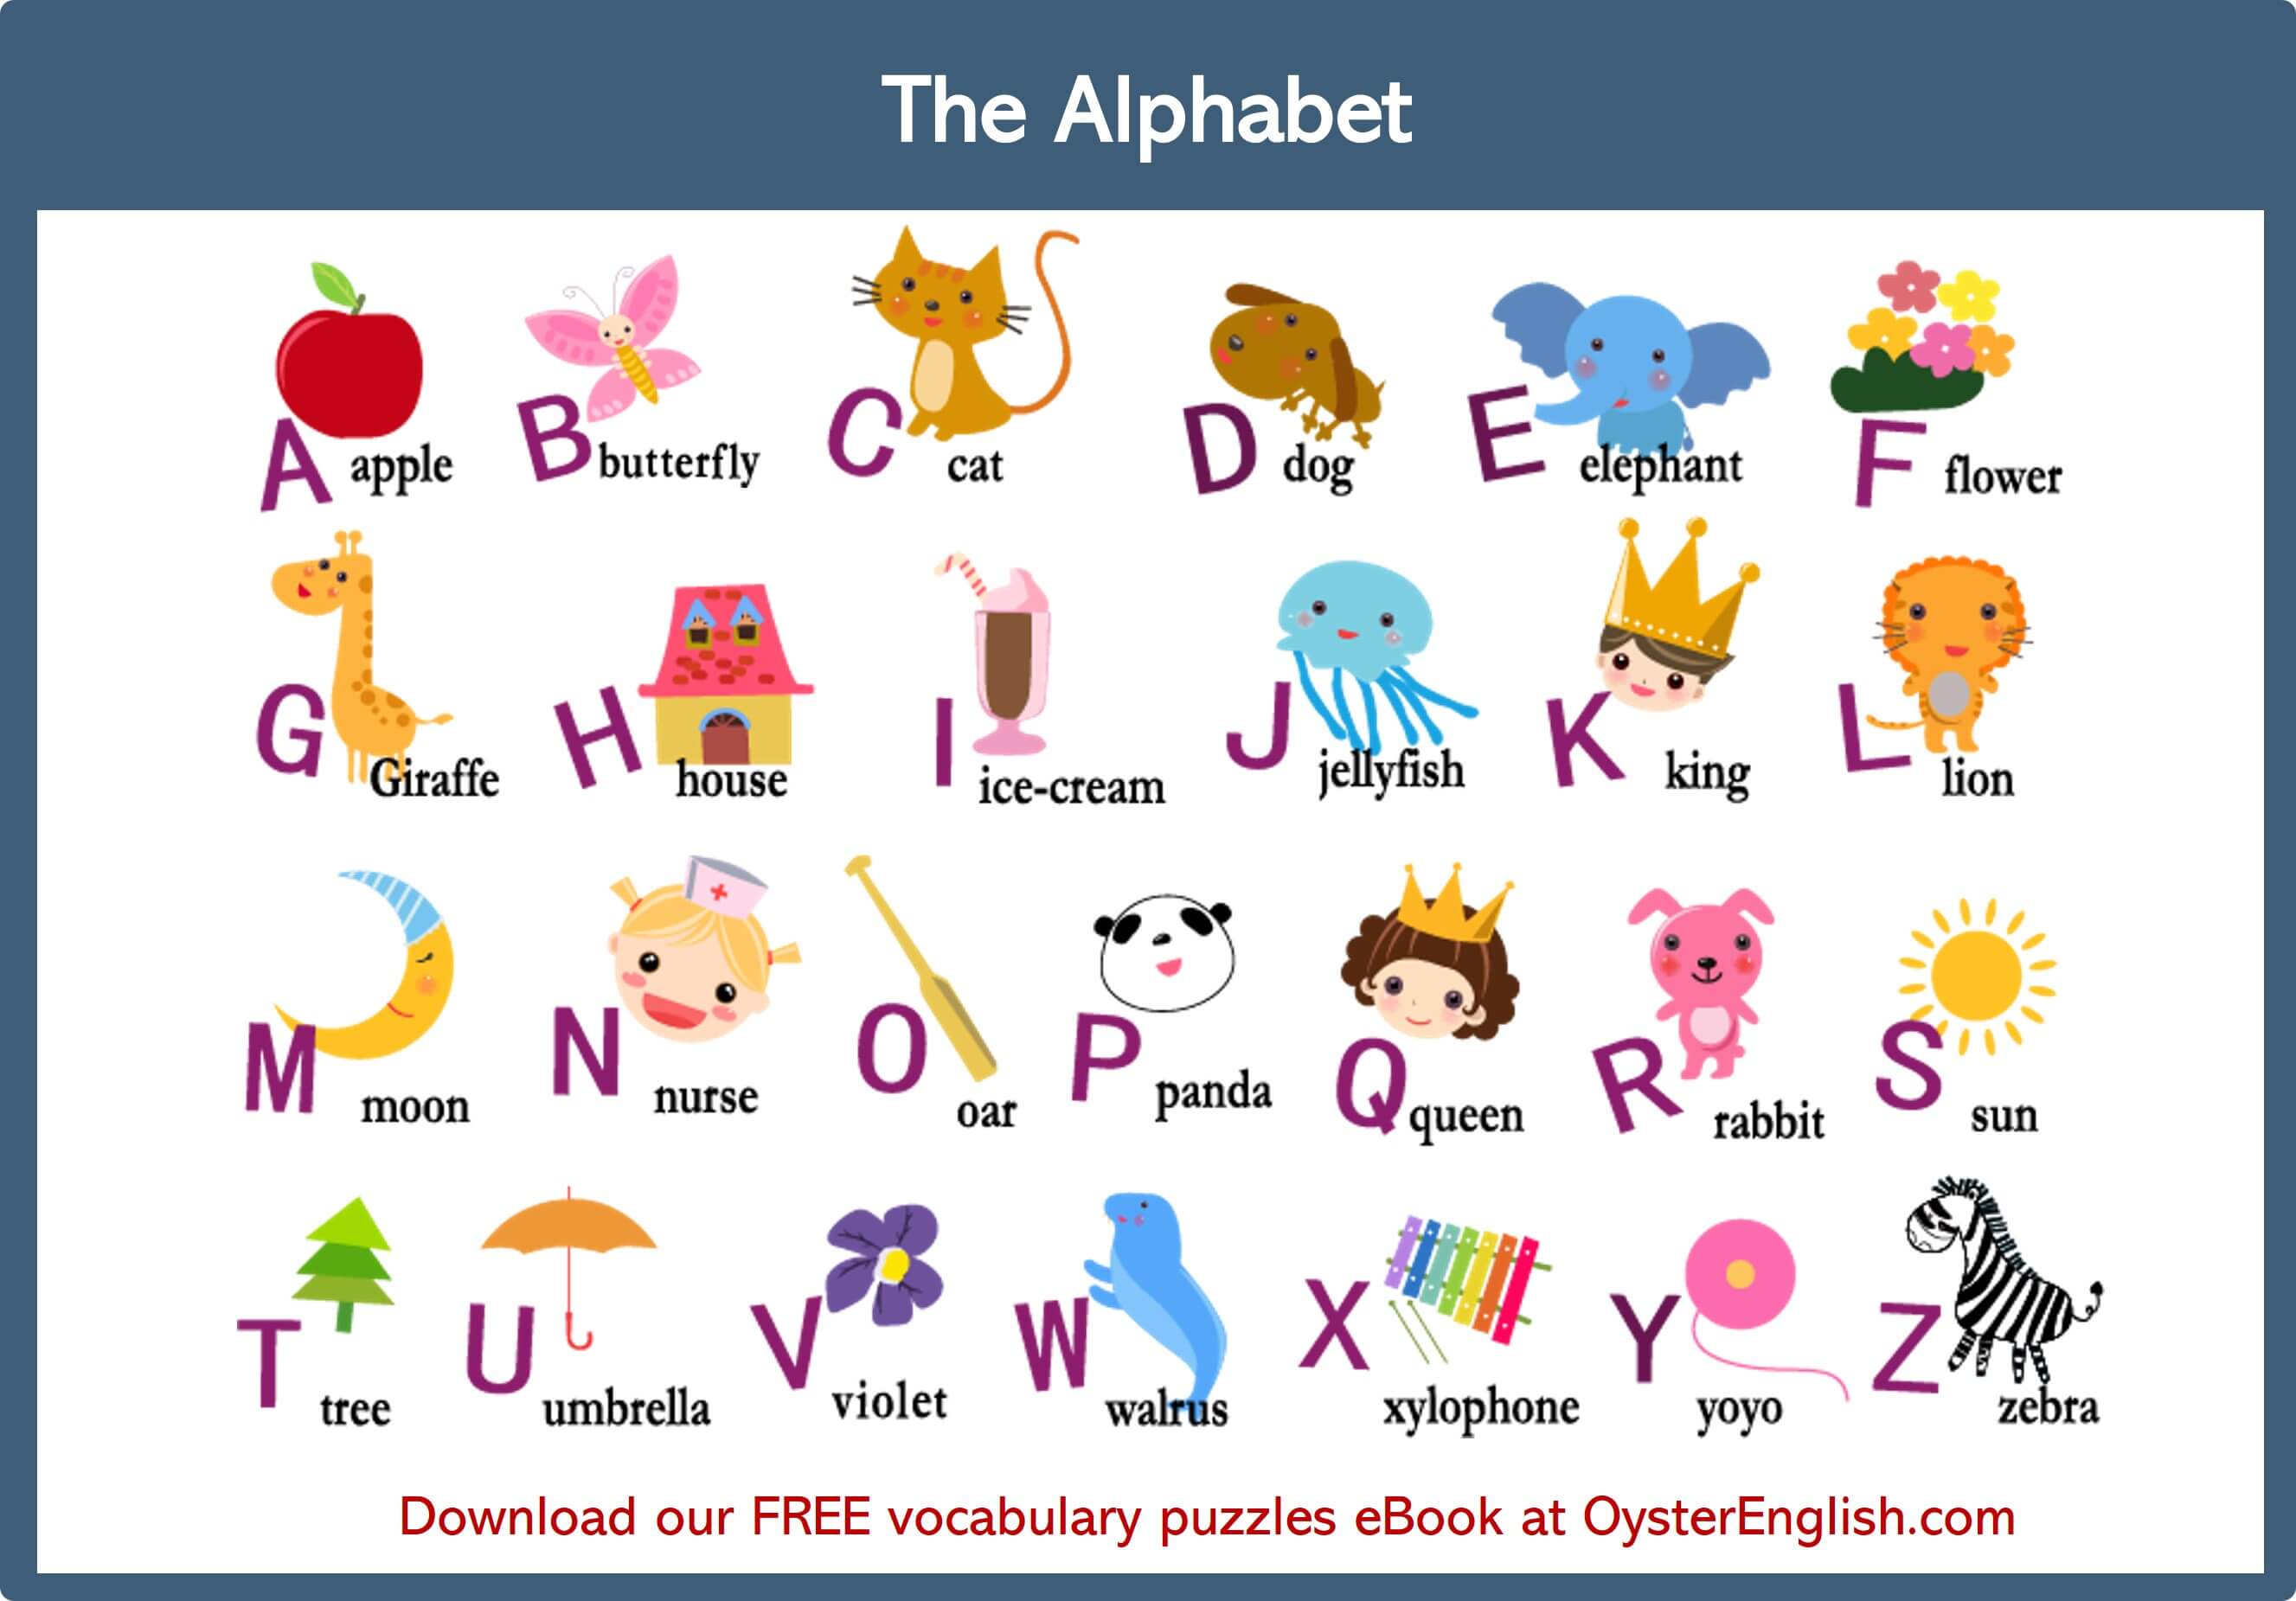 part-of-english-alphabet-with-examples-stock-illustration